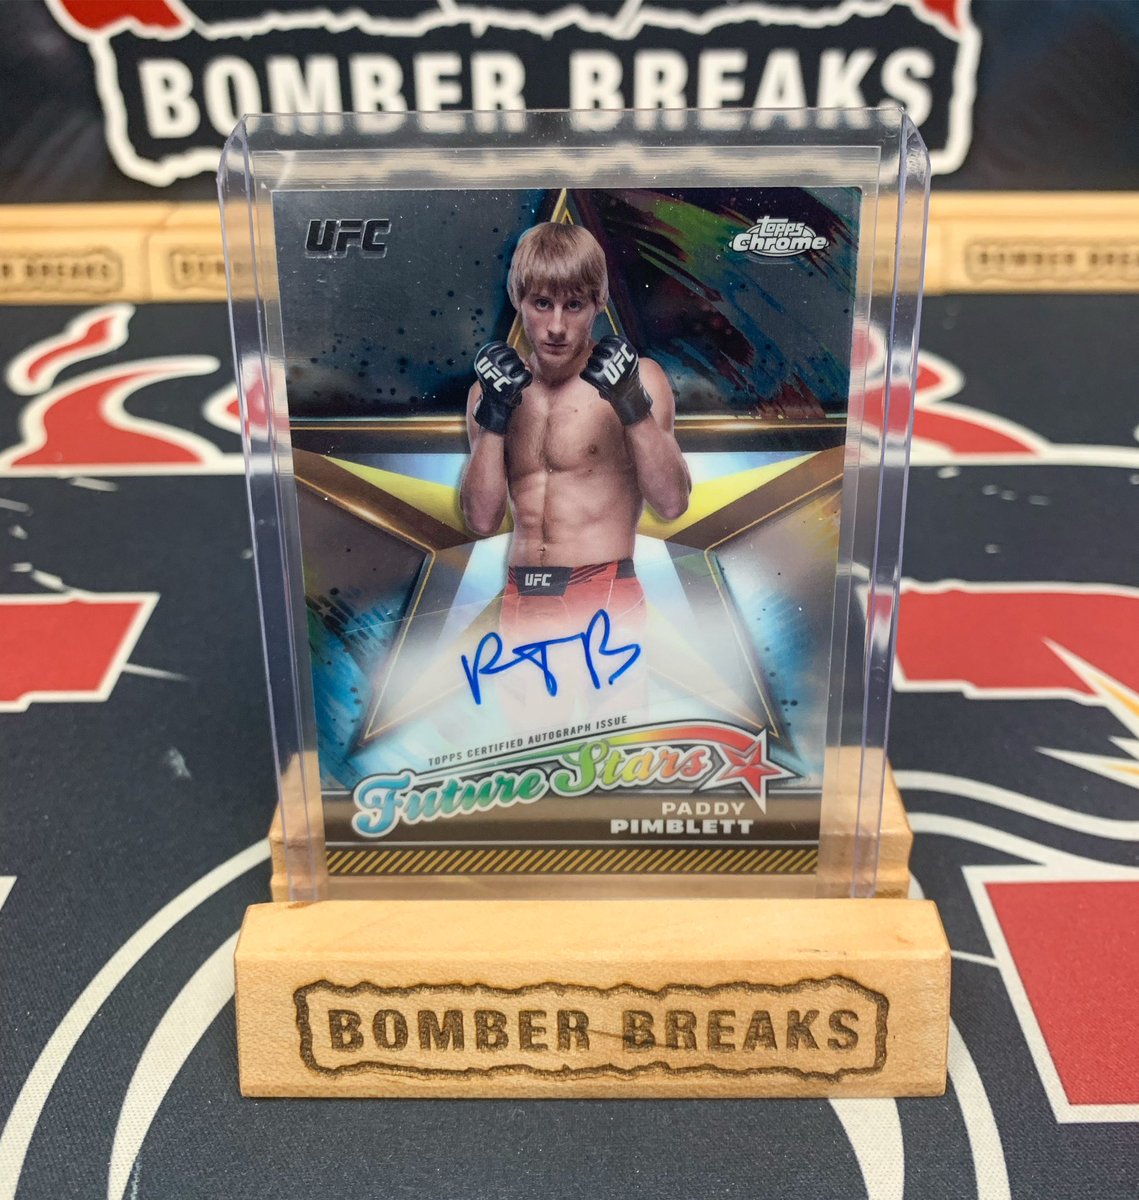 Paddy “The Baddy” Pimblett Future Stars Auto just pulled tonight in our @topps UFC Chrome breaks!
💥💥 @ufc @fanatics 
#ufc #mma #paddypimblett #paddythebaddy #thehobby #toppschrome #groupbreaks #boxbreaks #casebreaks #ufccards #topps #autograph #collect #boom